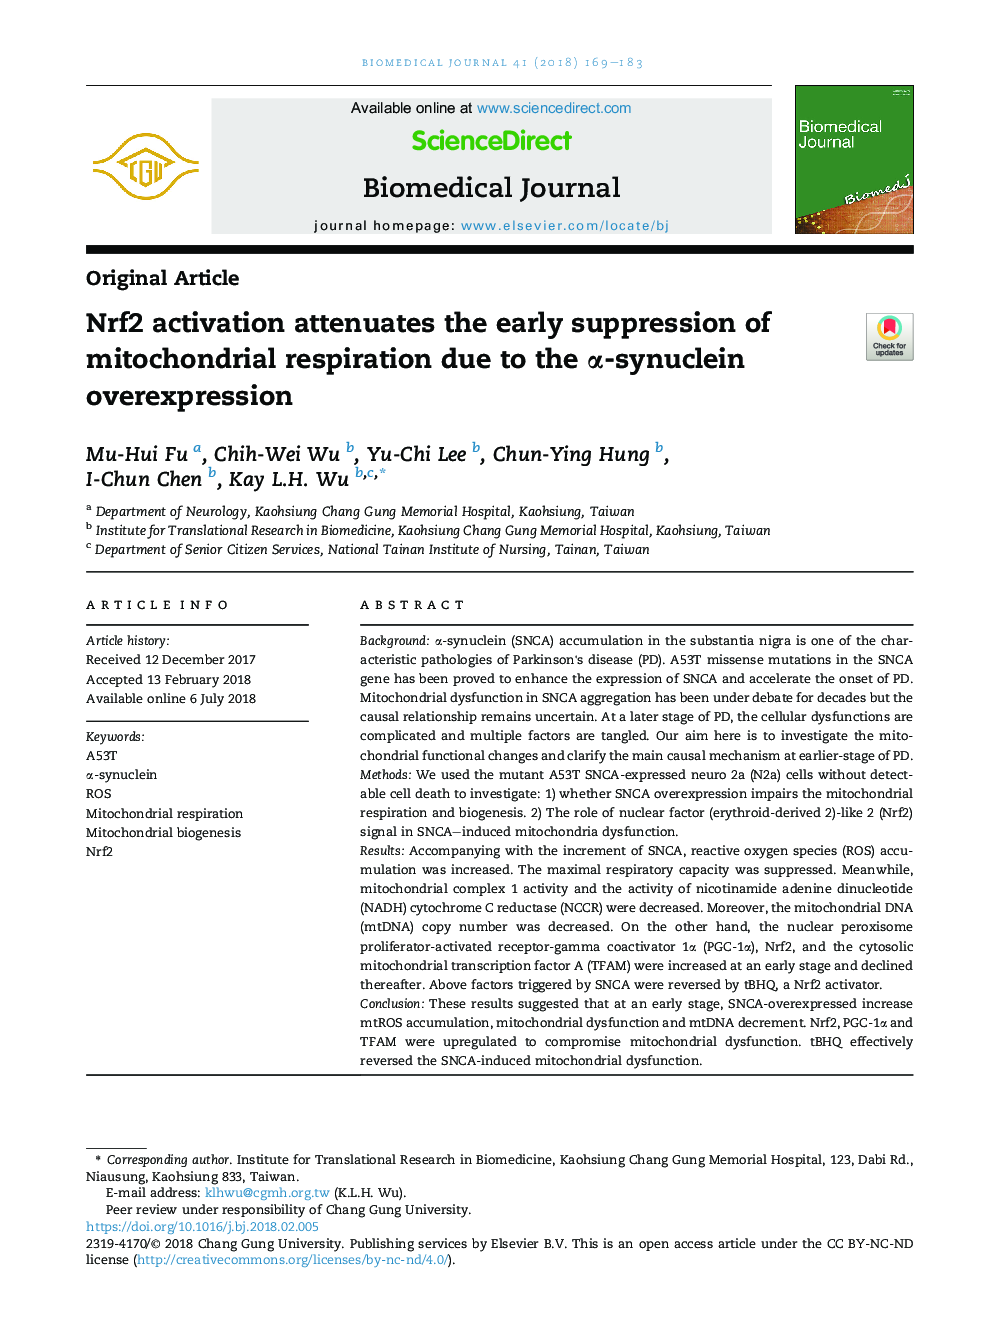 Nrf2 activation attenuates the early suppression of mitochondrial respiration due to the Î±-synuclein overexpression